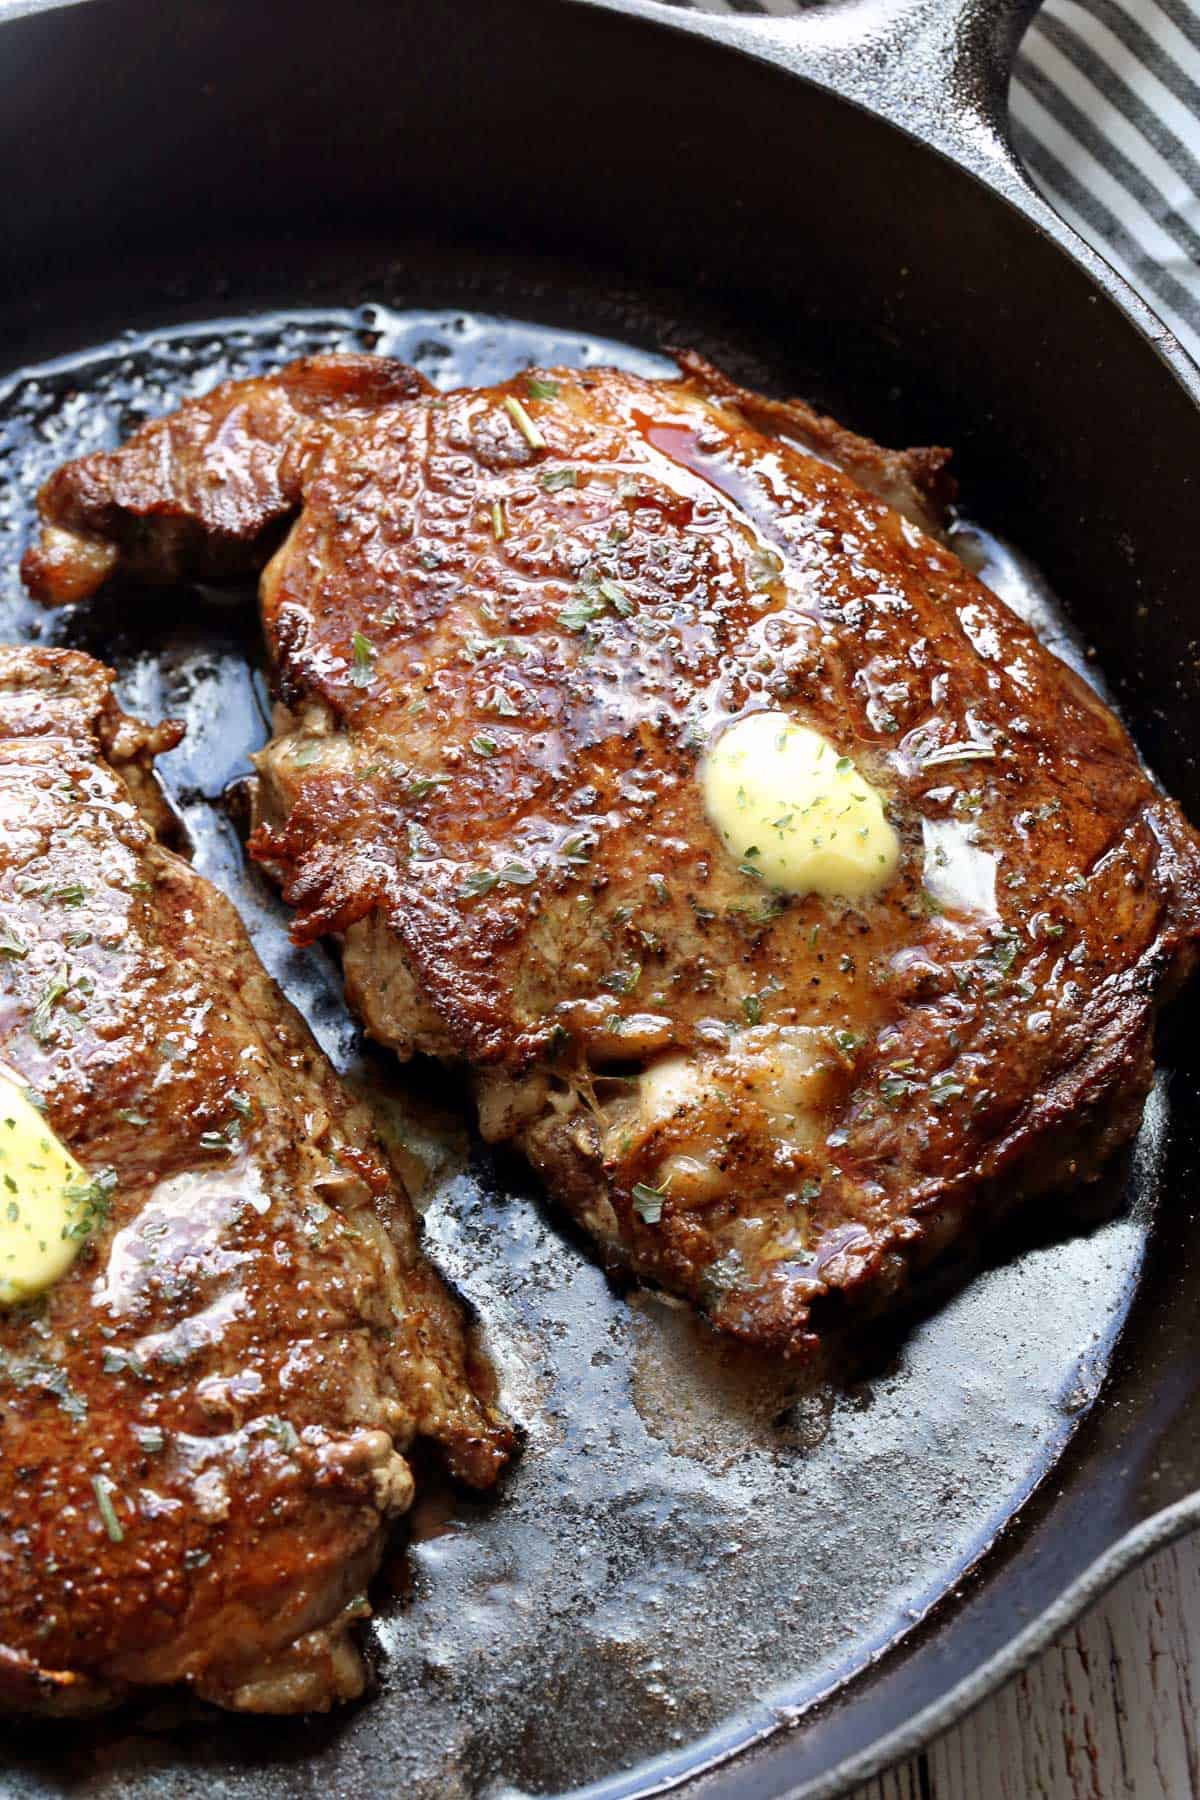 Ribeye steaks topped with butter.